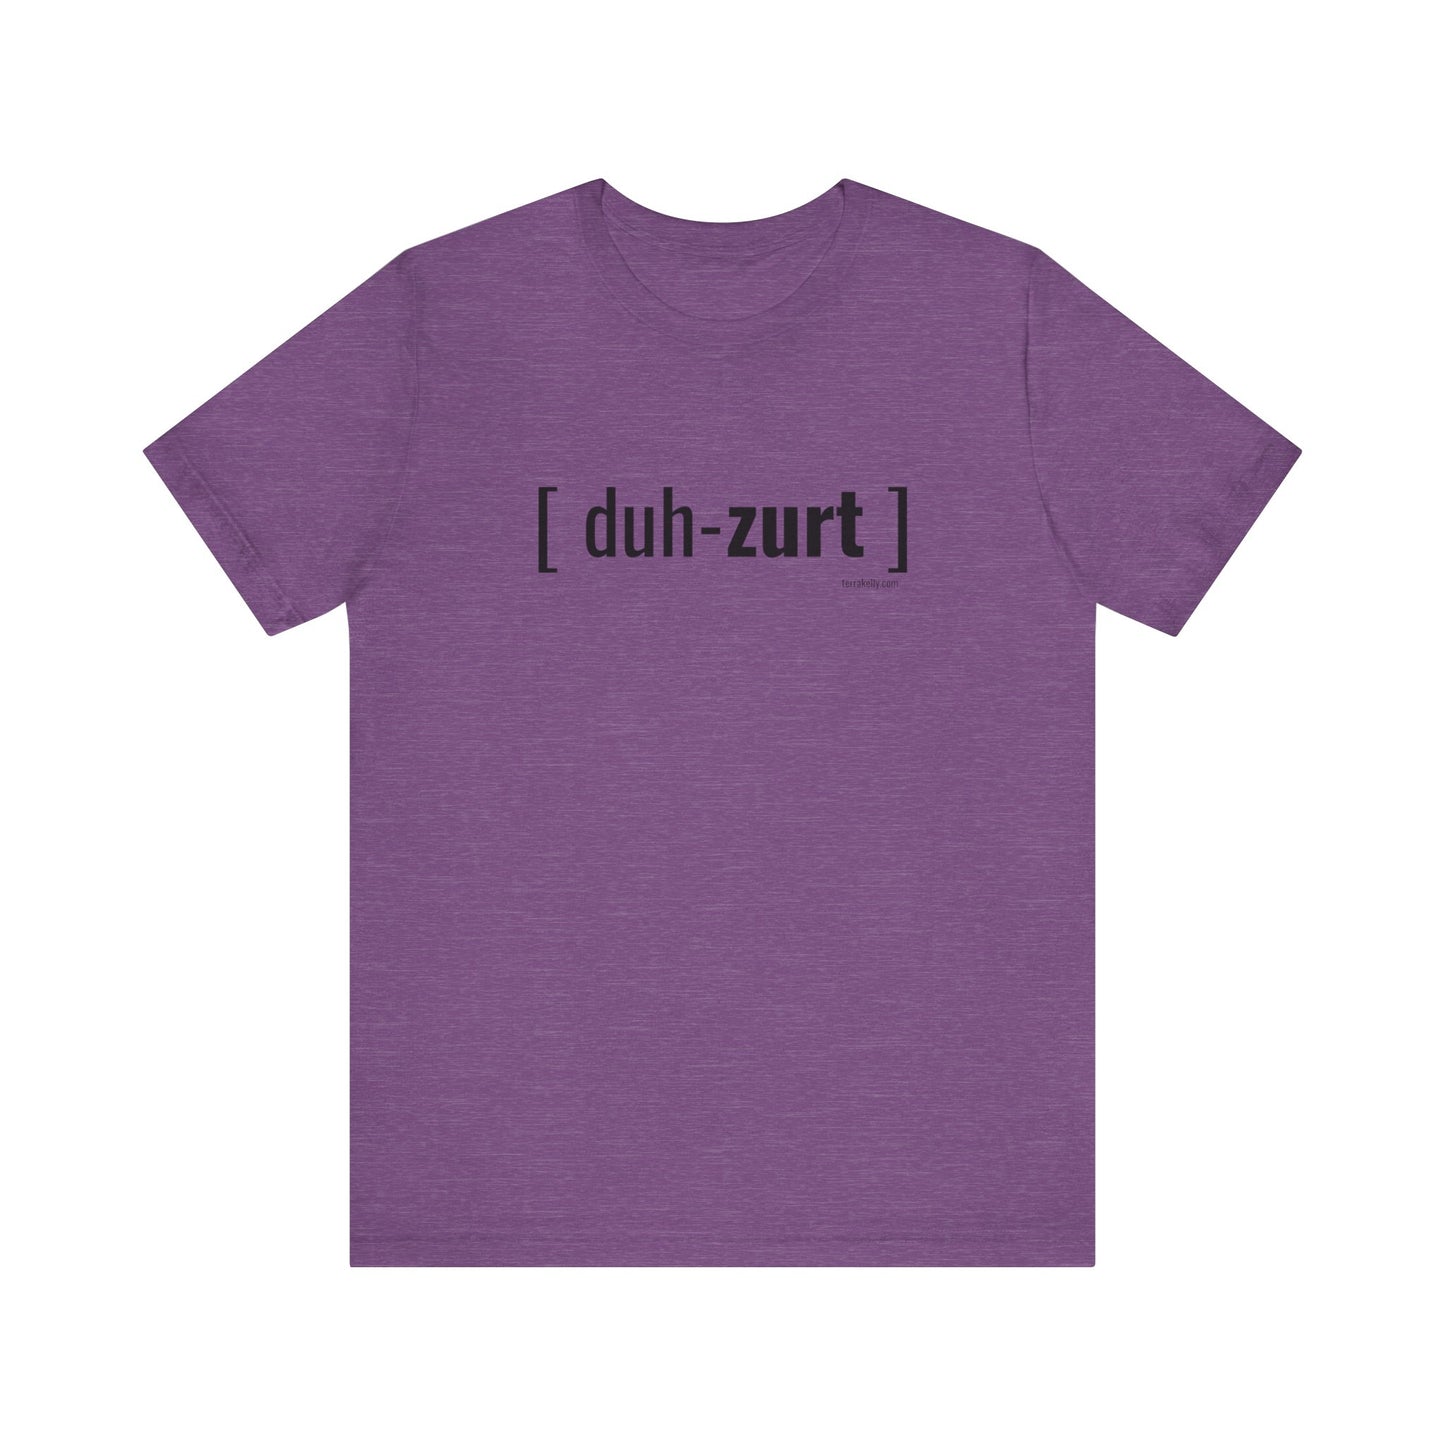 Dessert [duh-zurt] Unisex Jersey Short Sleeve T-shirt | Available in Five Colors & Six Sizes | FREE SHIPPING